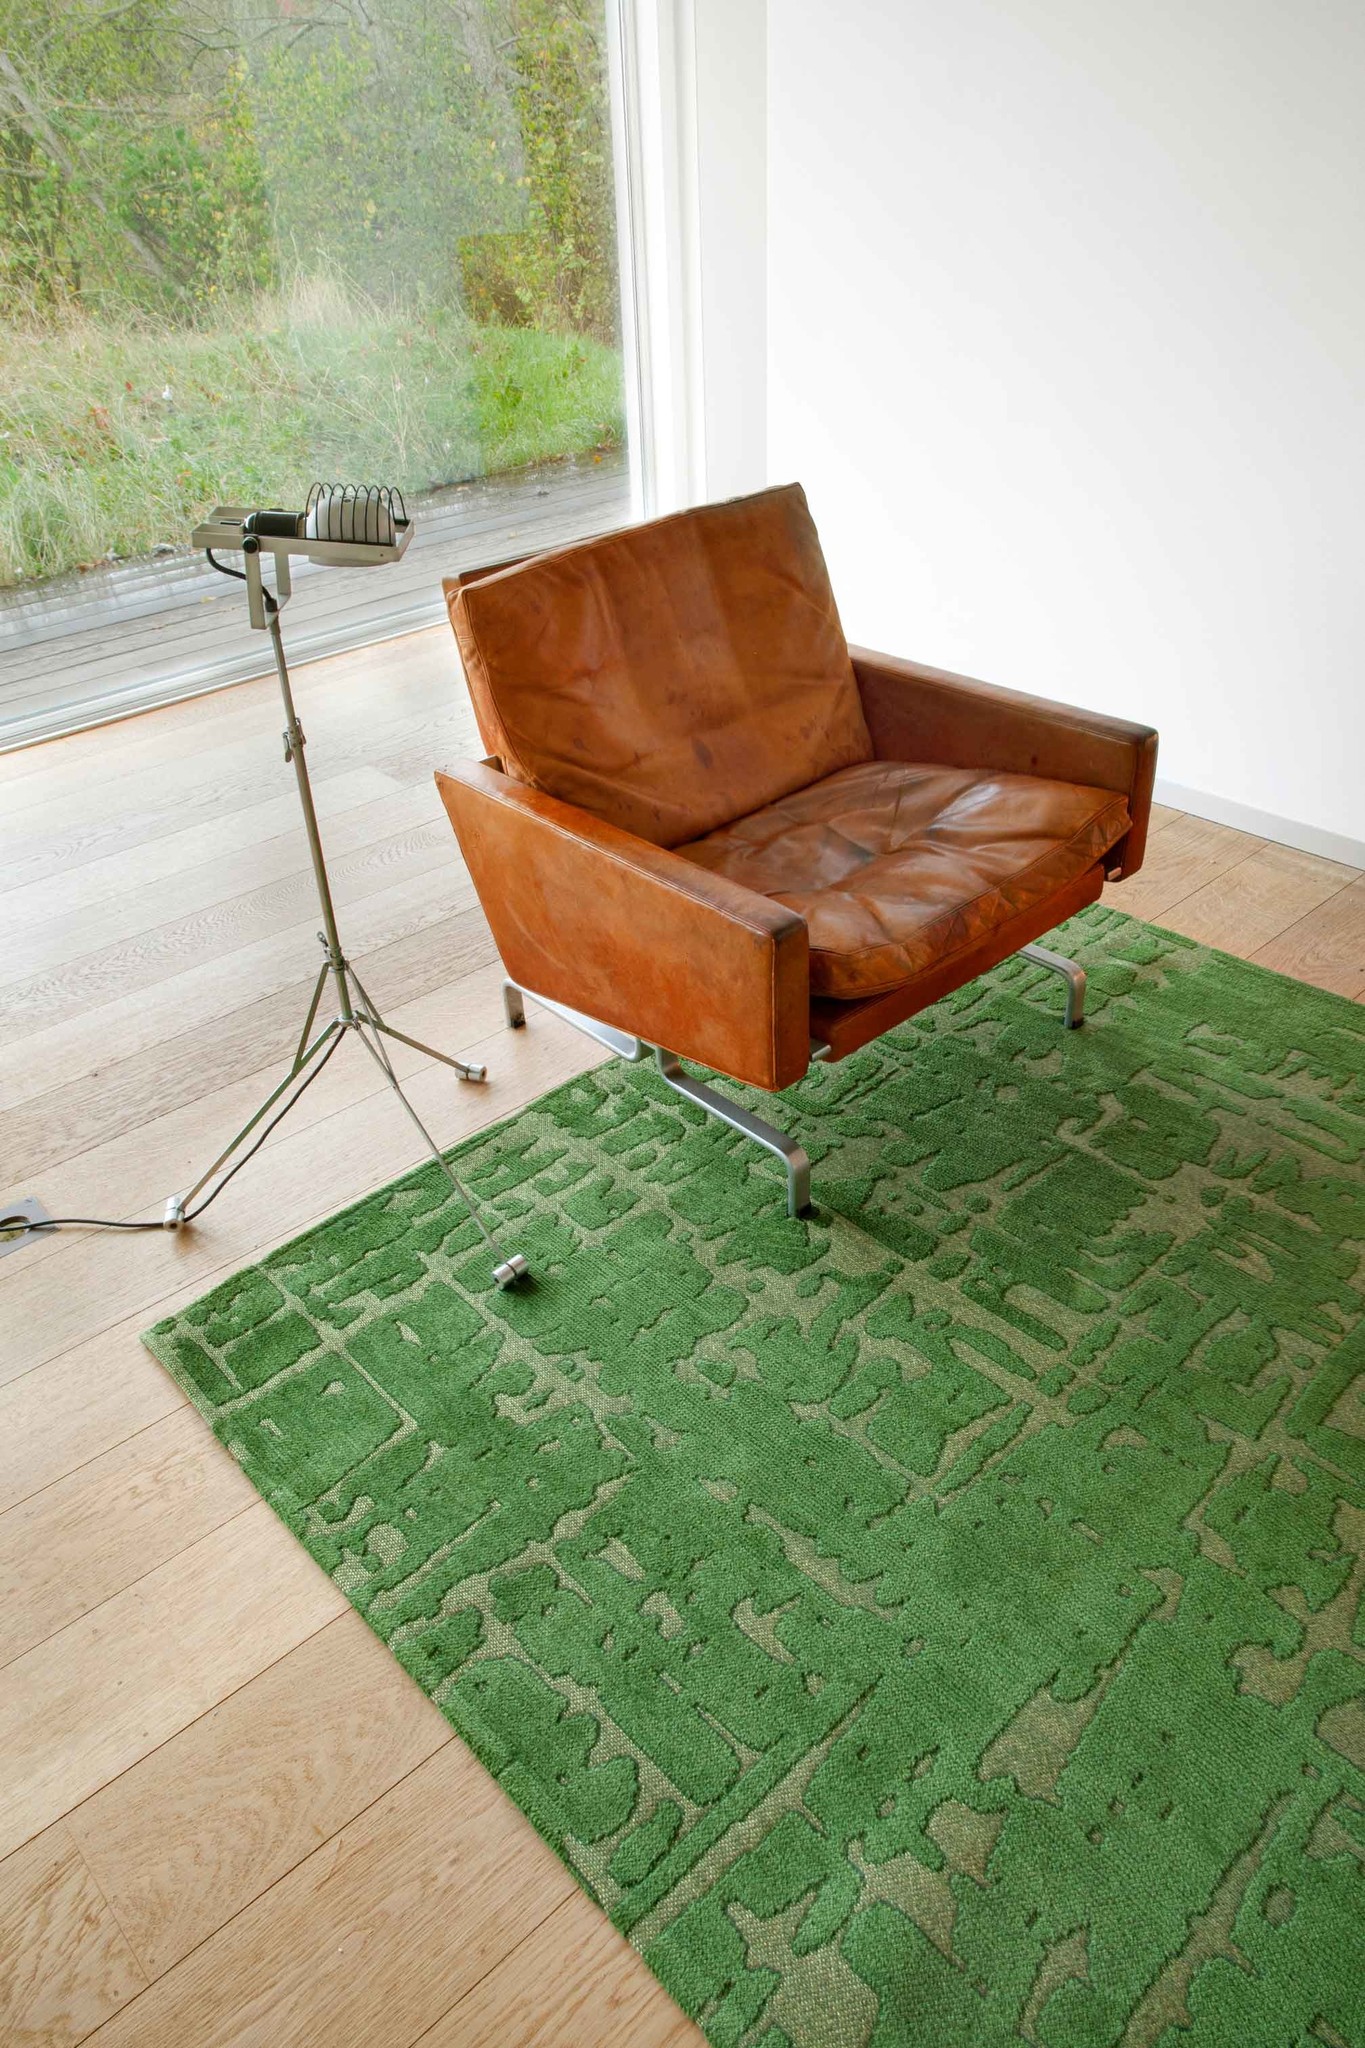 Abstract Green Belgian Rug ☞ Size: 8' x 11' 2" (240 x 340 cm)